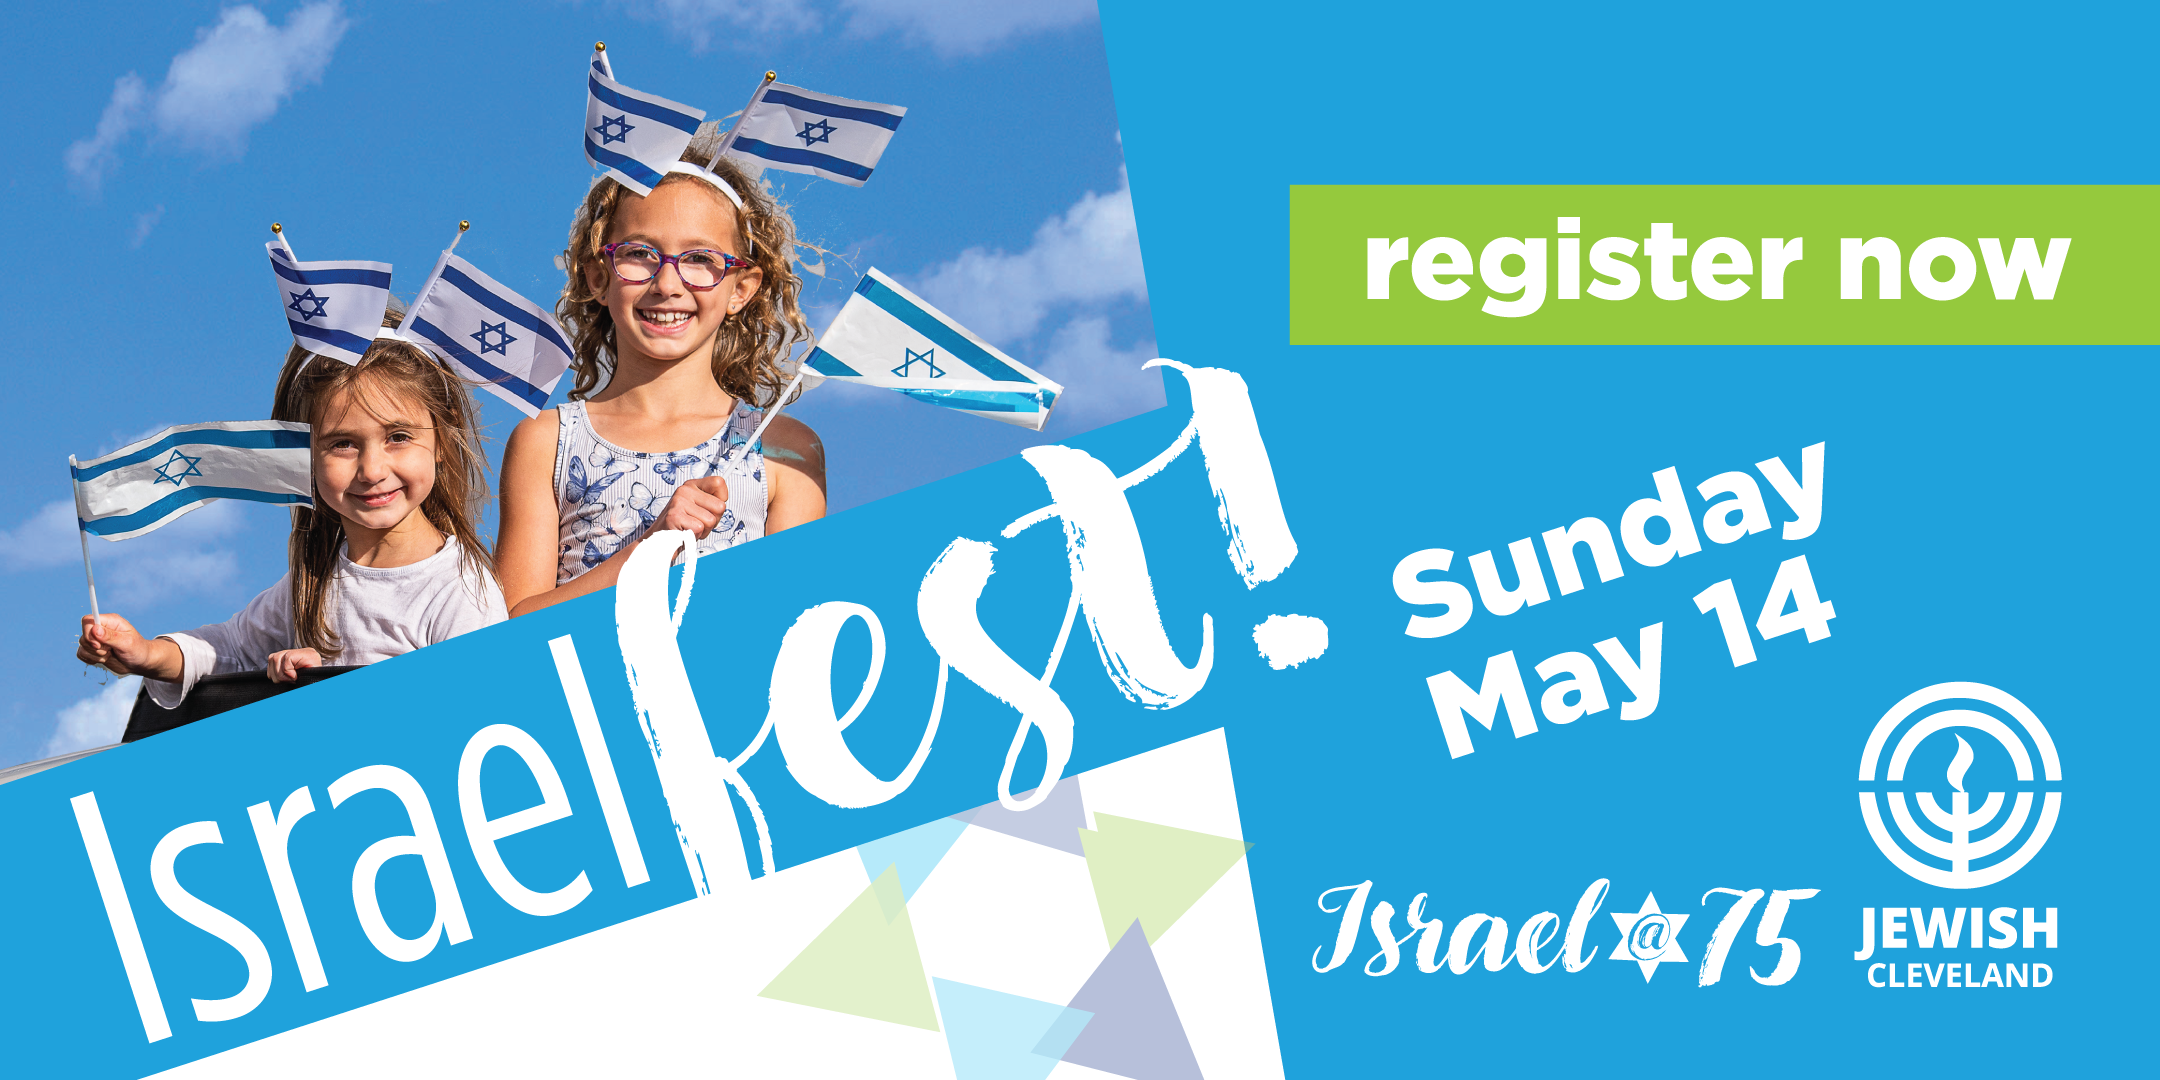 Why You Should Go to IsraelFest!